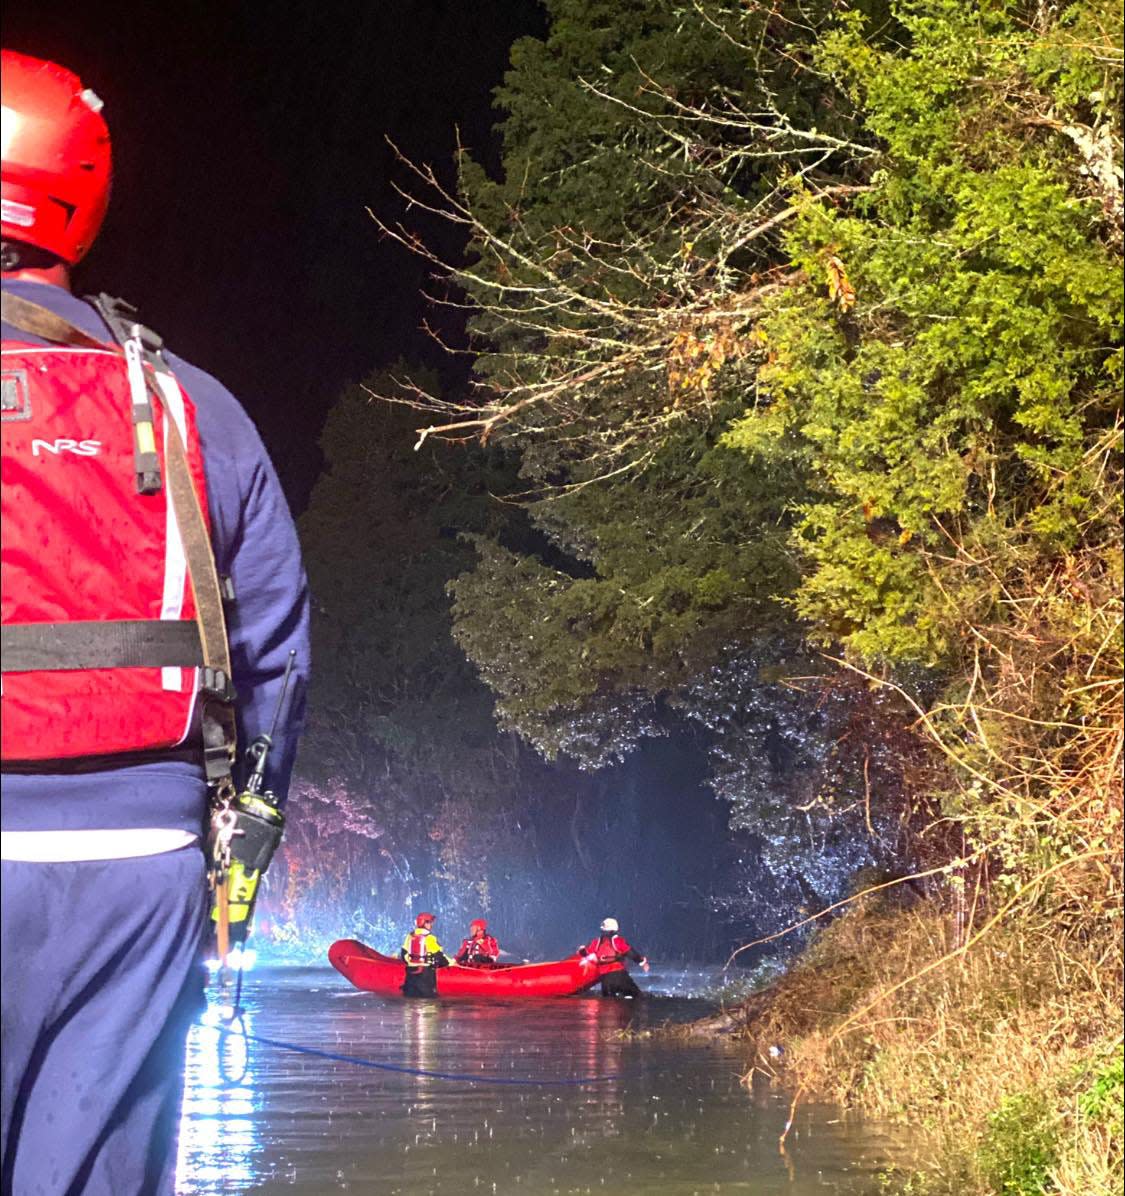 Members of the  Maury County Fire Department are dispatched to 2411 Rally Hill Road in Columbia to rescue two people swept downstream in their vehicle at about 7:30 p.m. on Wednesday, Jan. 19, 2022.